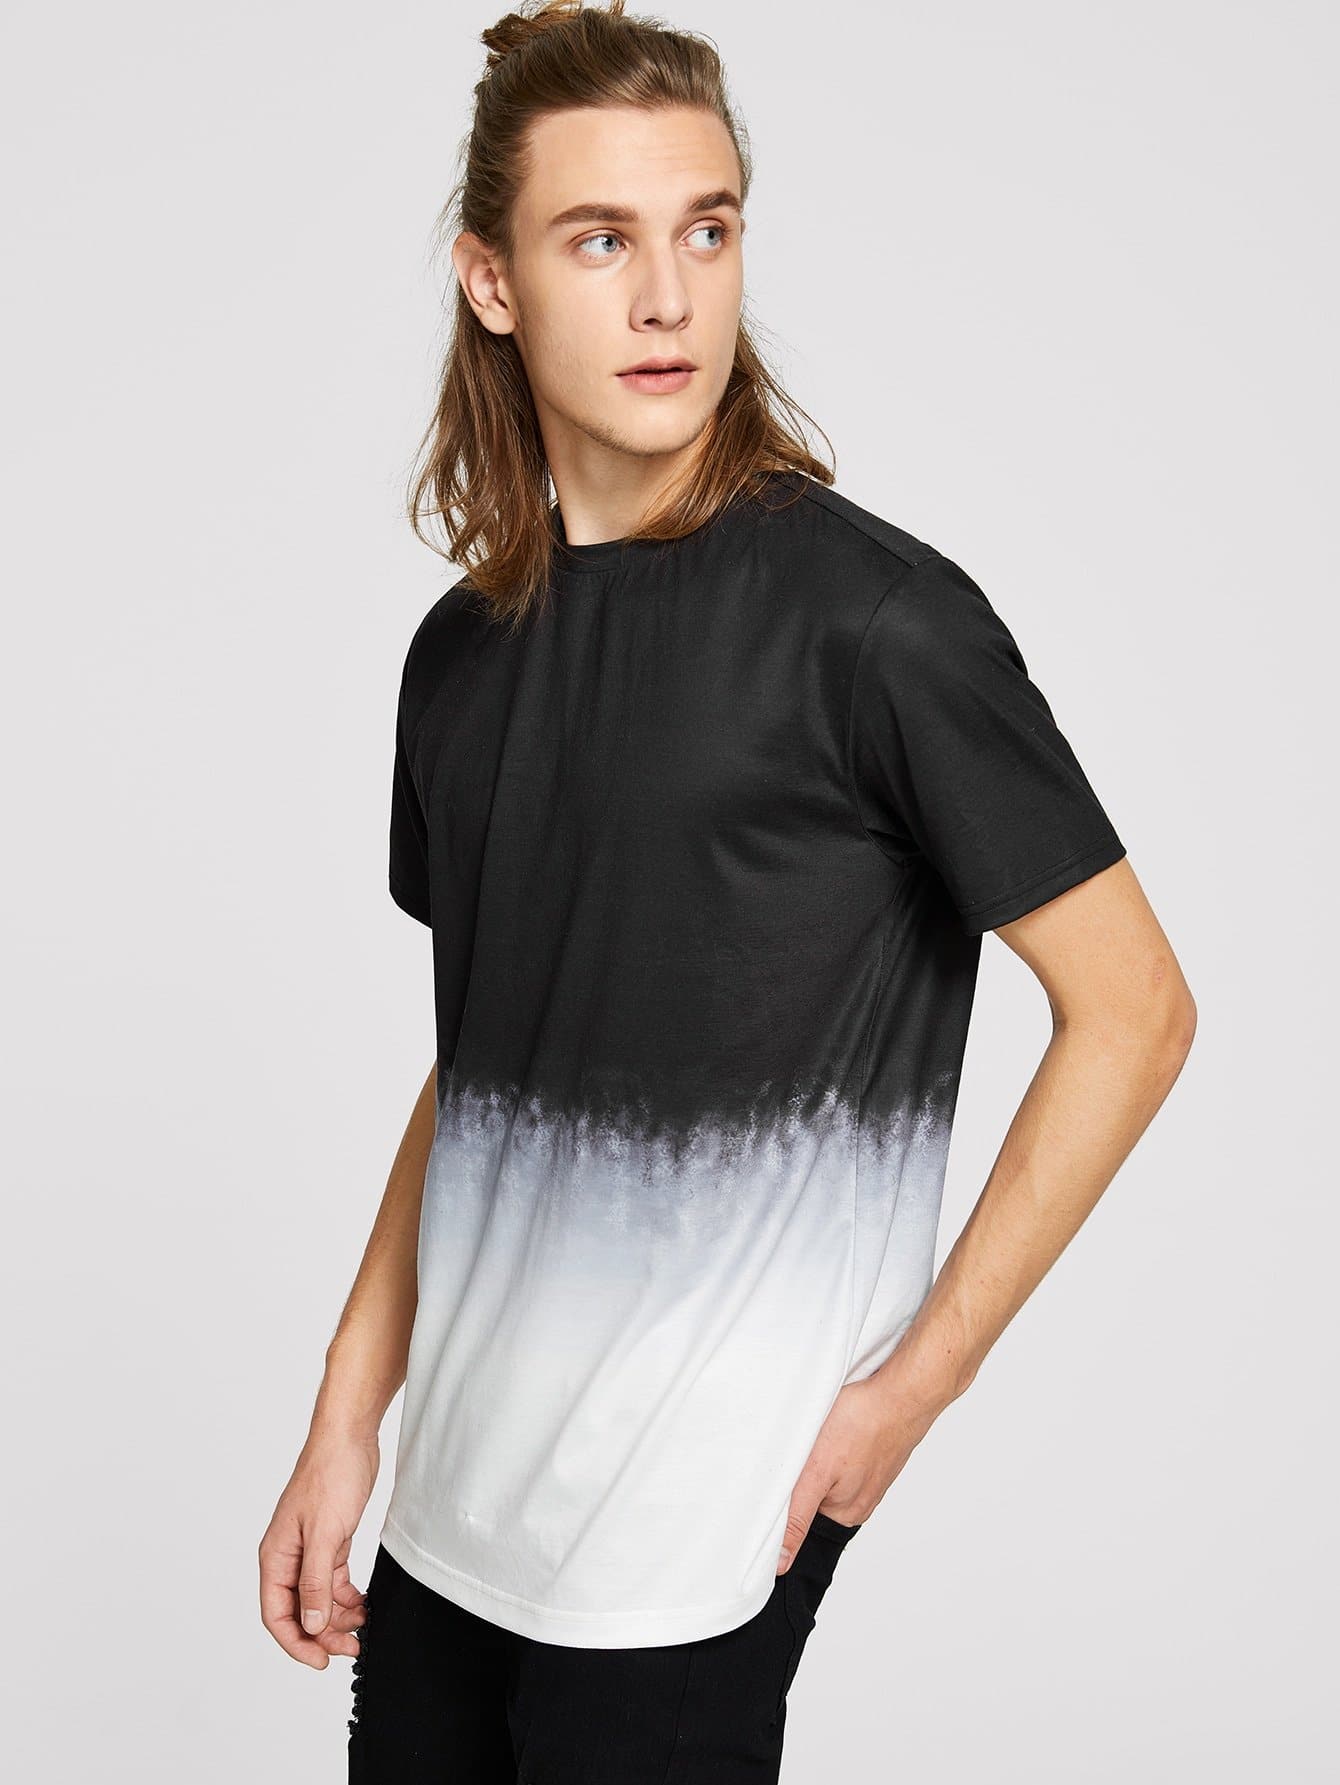 Black and White Short Sleeve Two-tone Ombre T-shirt